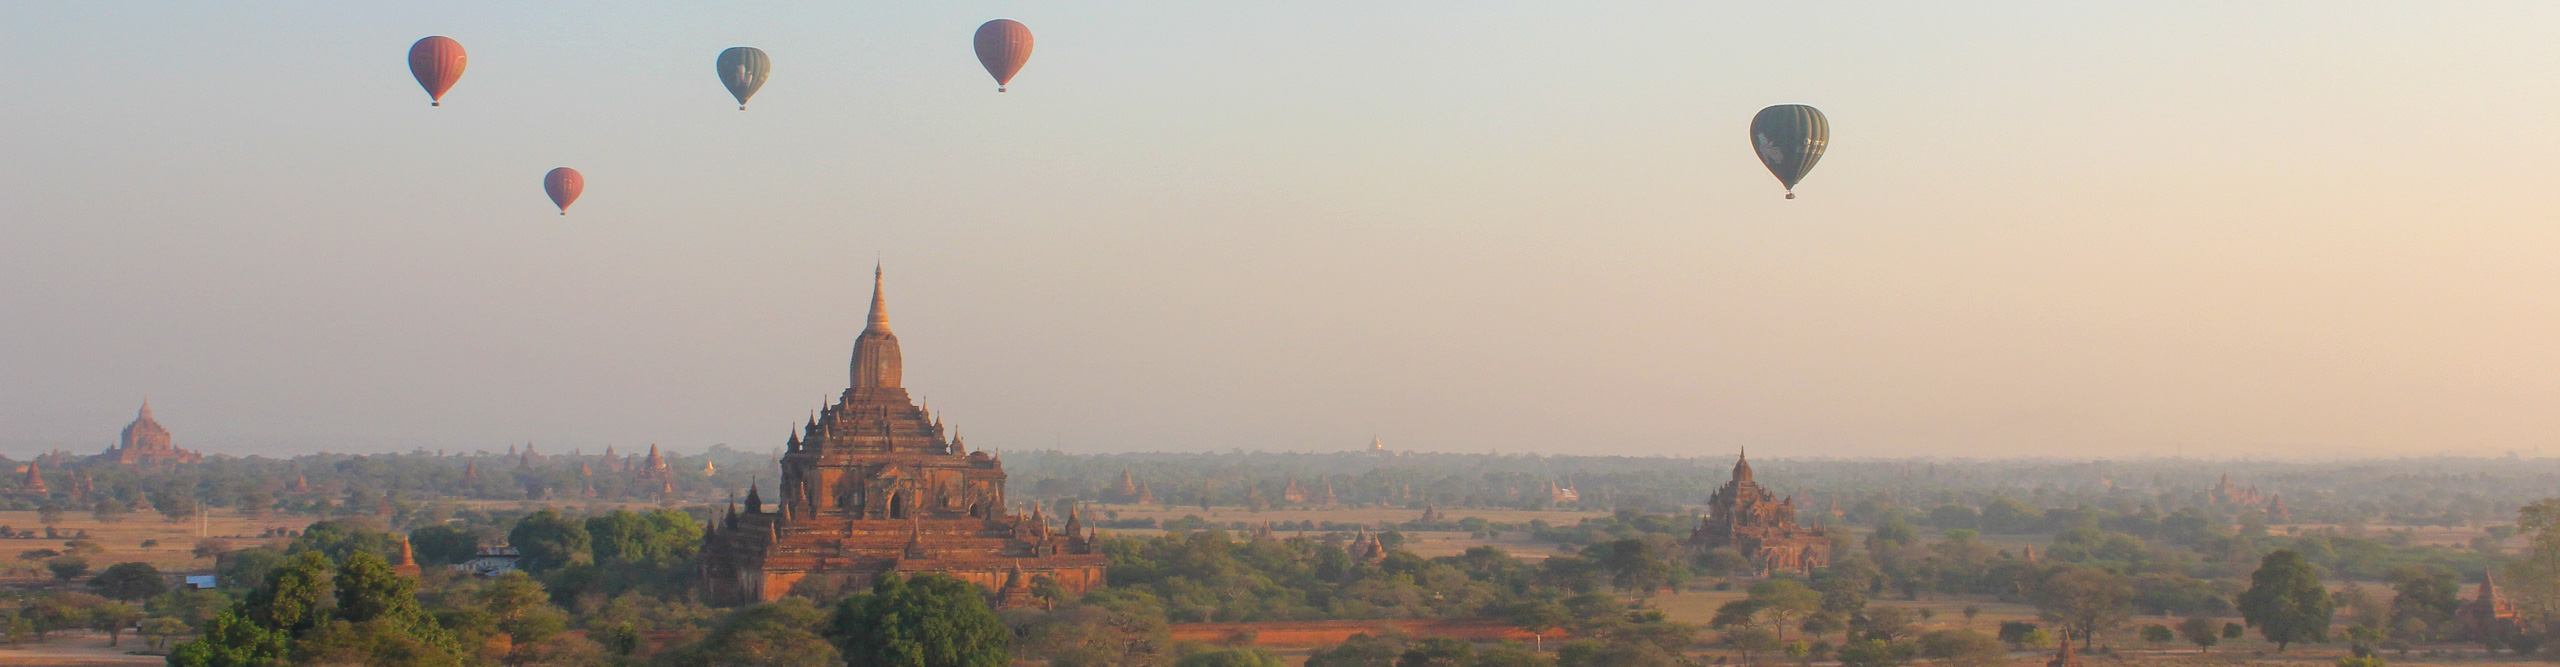 Bsllons in the sky over the temples on a misty morning, in Bagan, Myanmar Burma 